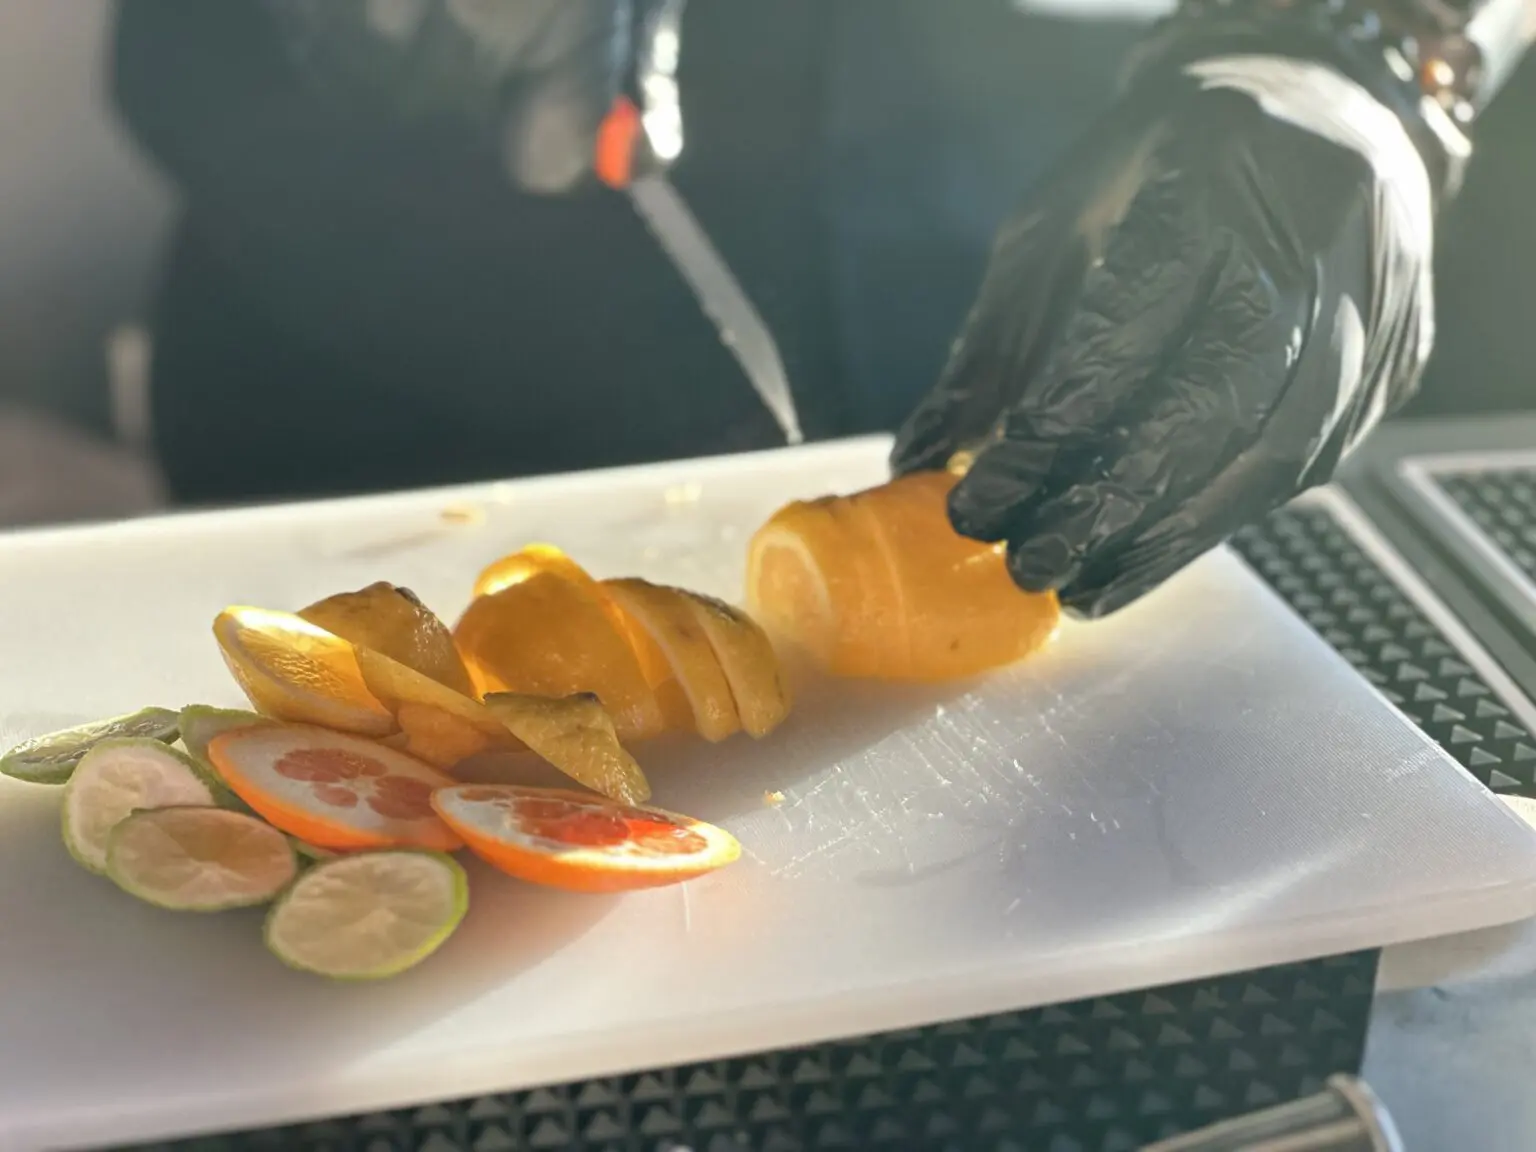 A person wearing black gloves cutting up fruit.